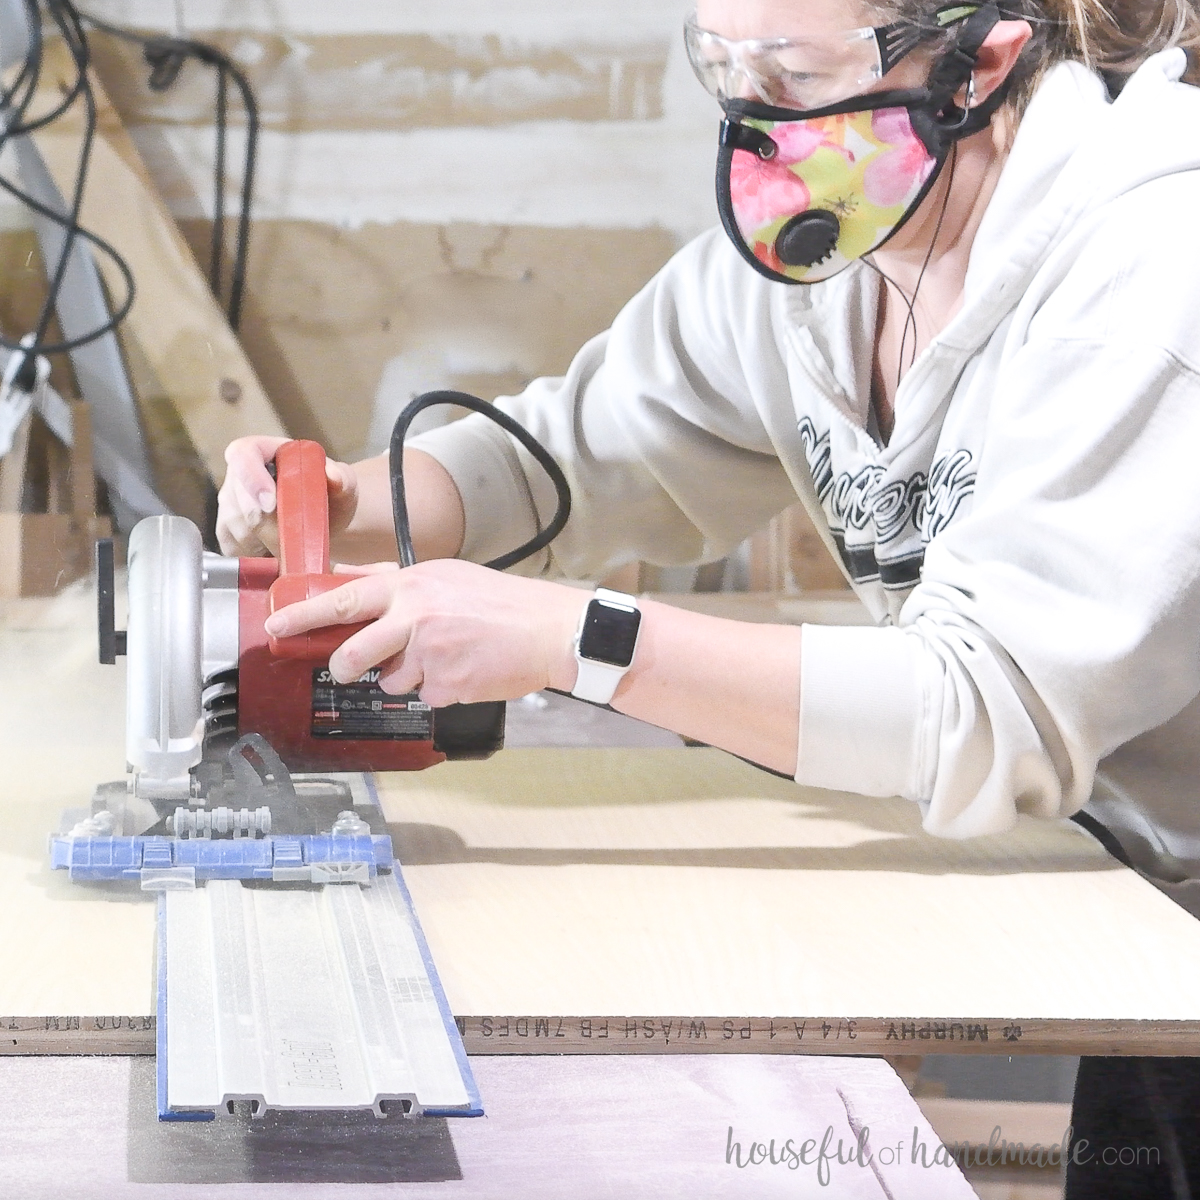 Cutting plywood with a circular saw and AccuCut guide.